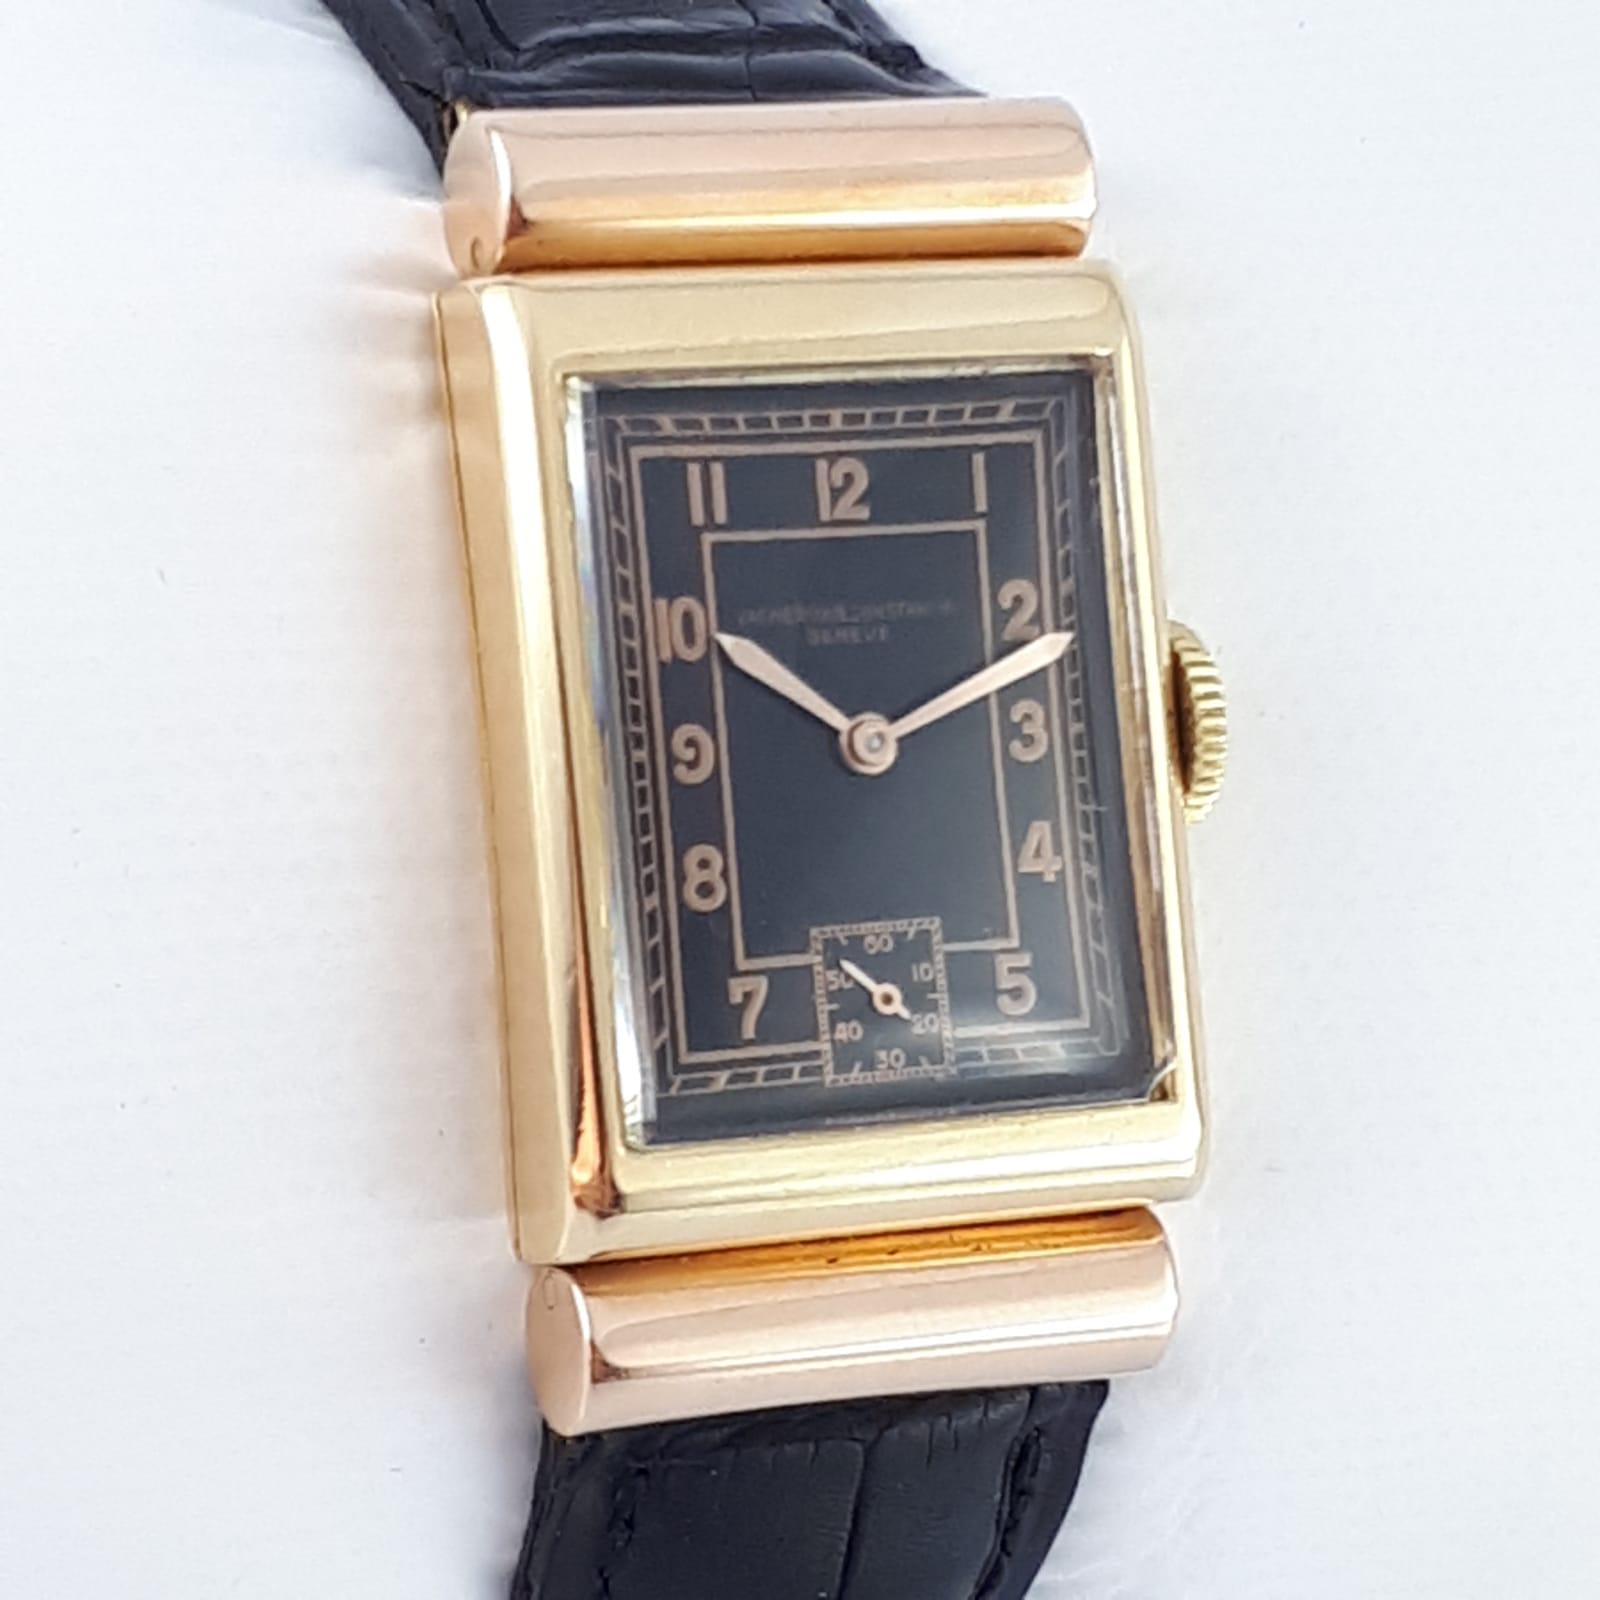 *Collection Item *
Brand:Vacheron Constantin
Model:Vintage Hooded Lugs Dress Watch
Reference Number:Ref: 6665
Gender:Men
Period:1960-1969
Movement:Manual winding
Case material:Yellow gold & Rose Gold
Material fineness:18 kt
Type:Analogue